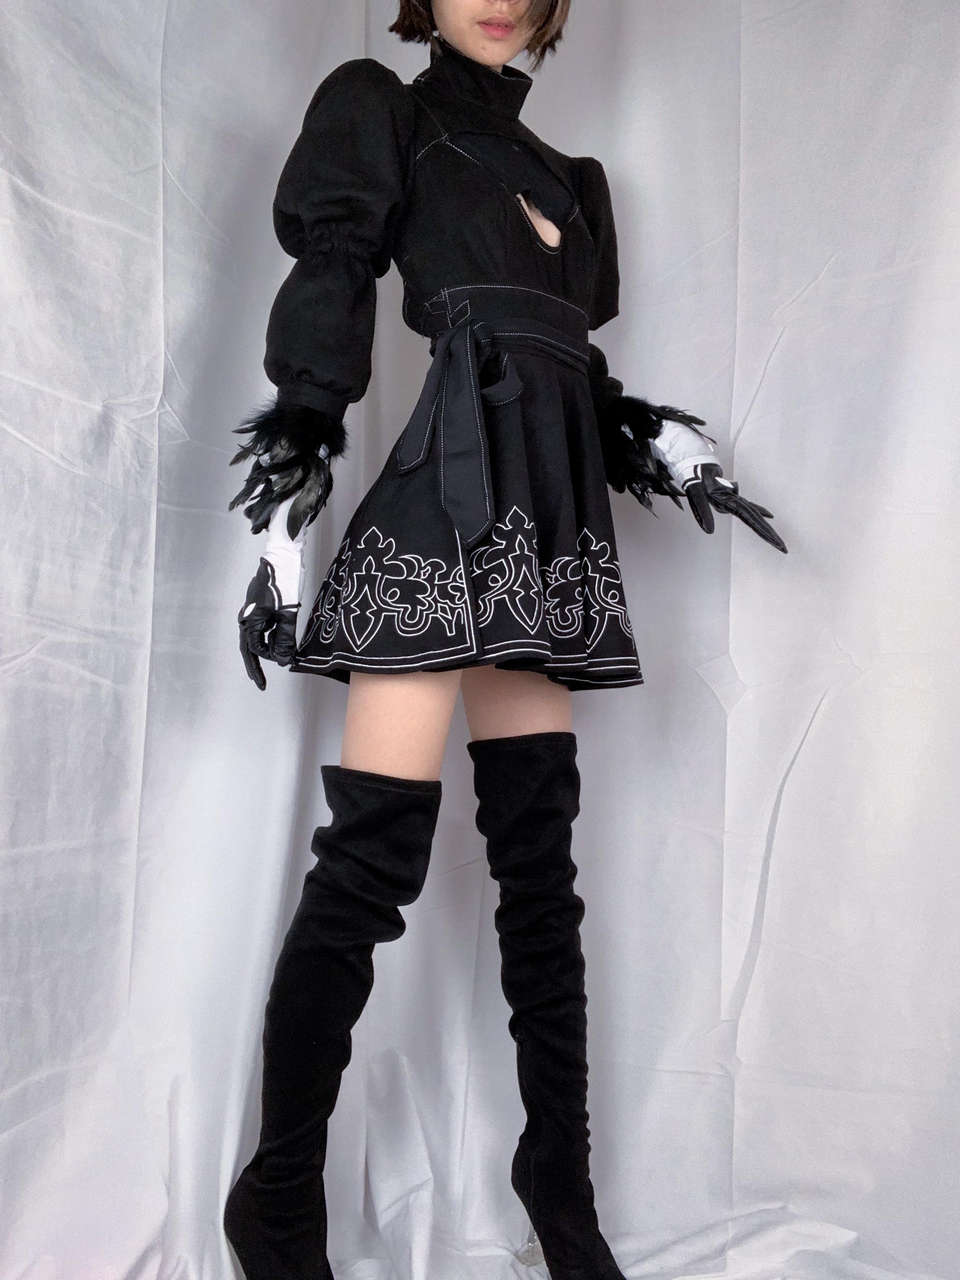 Heres My Amateur Attempt At 2b 0